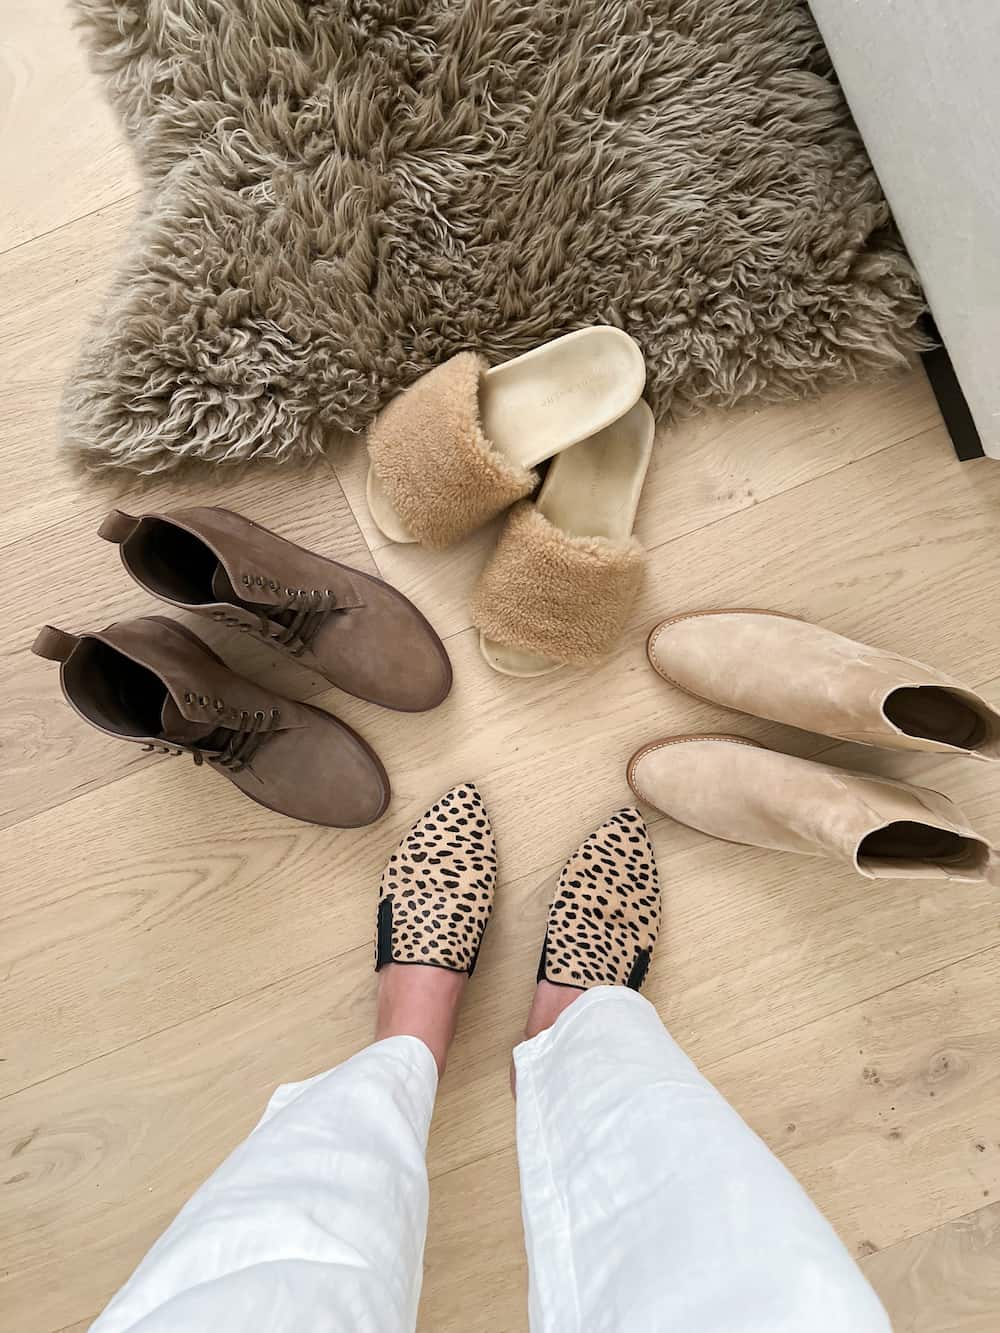 image of an overhead view of four pairs of Jenni Kayne shoes including brown boots, suede tan boots, shearling slides, and leopard mules